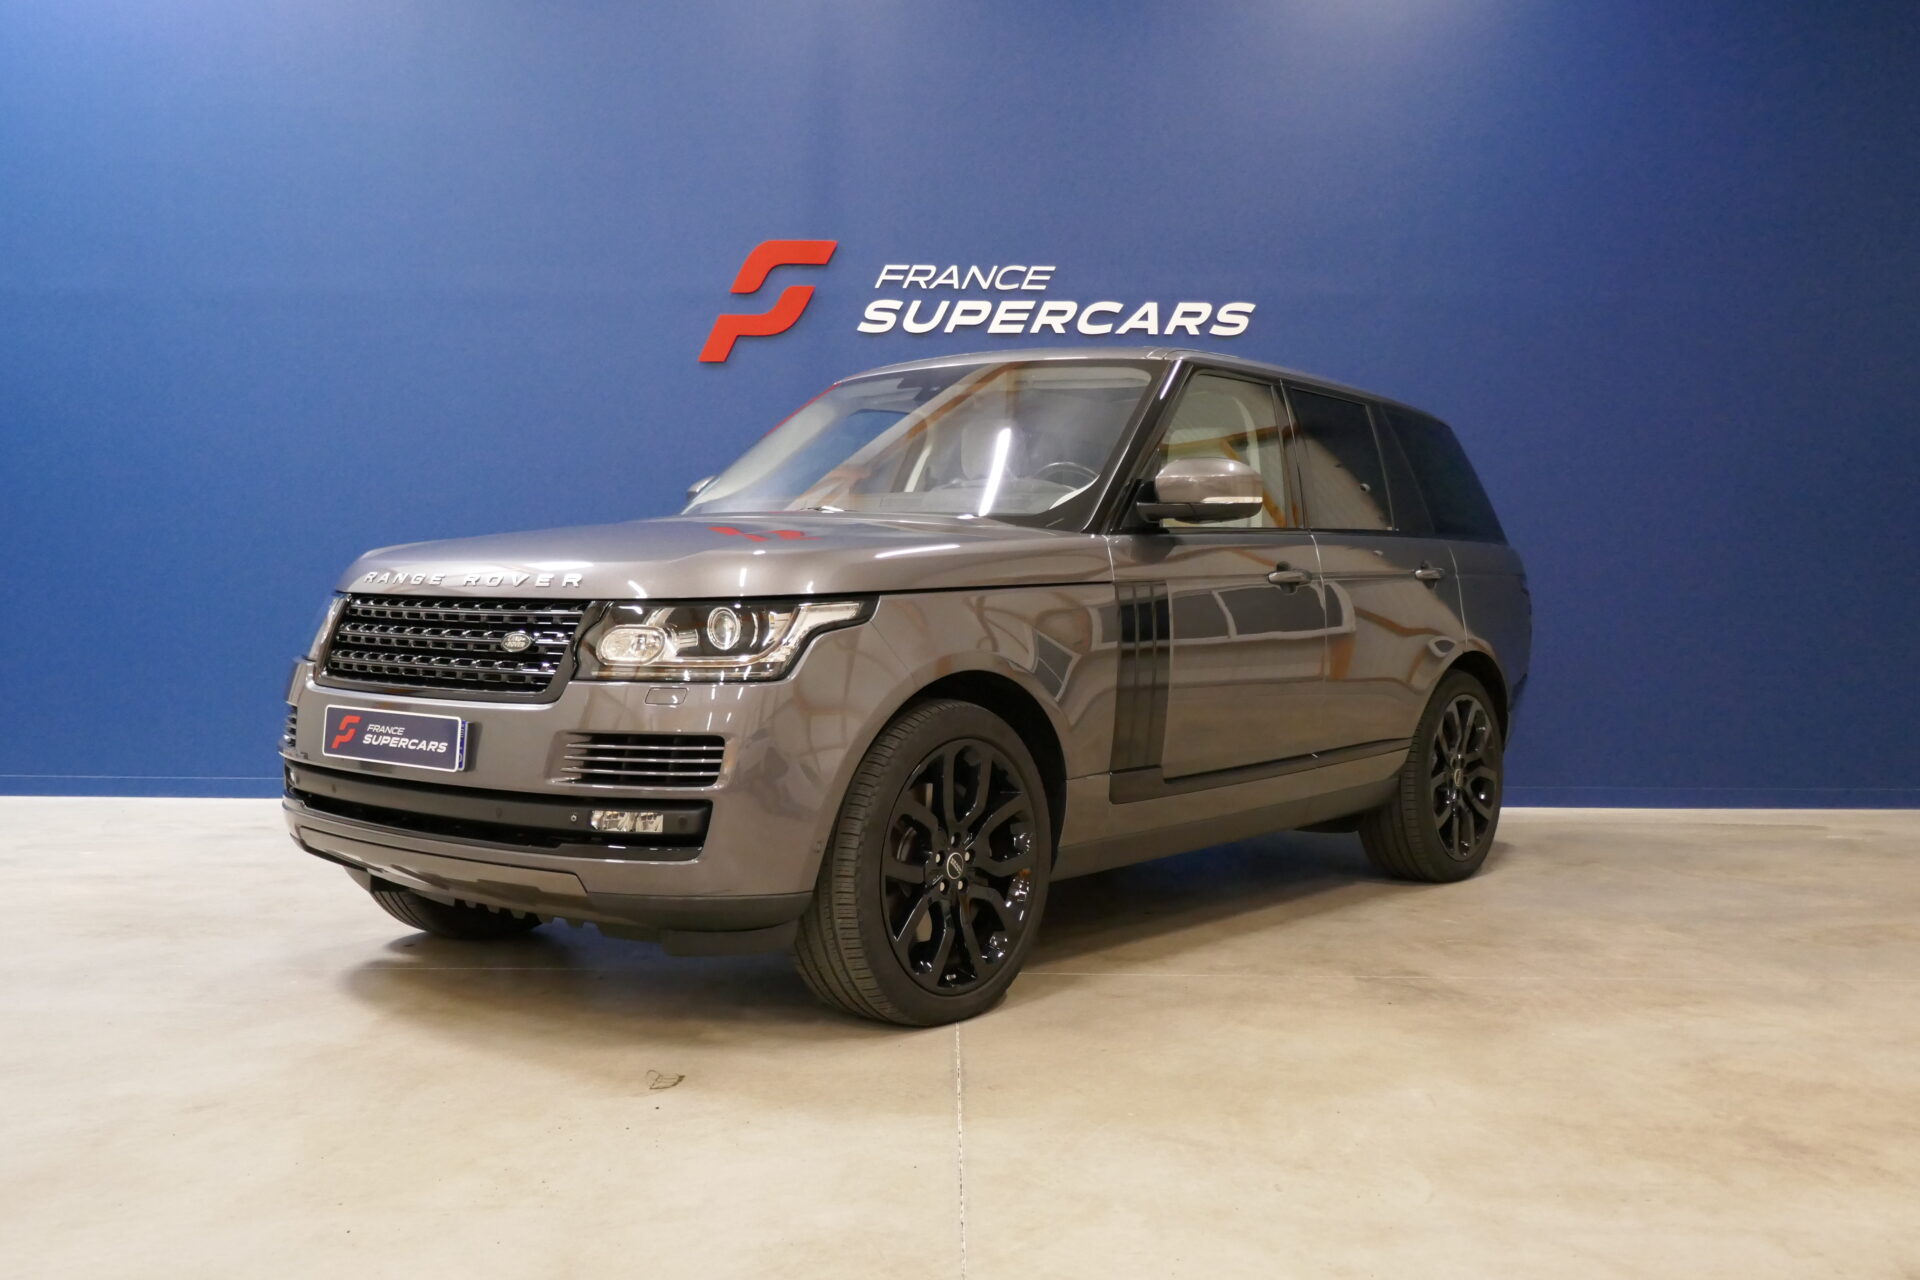 LAND ROVER RANGE ROVER 5.0 SUPERCHARGED FRANCE SUPERCARS